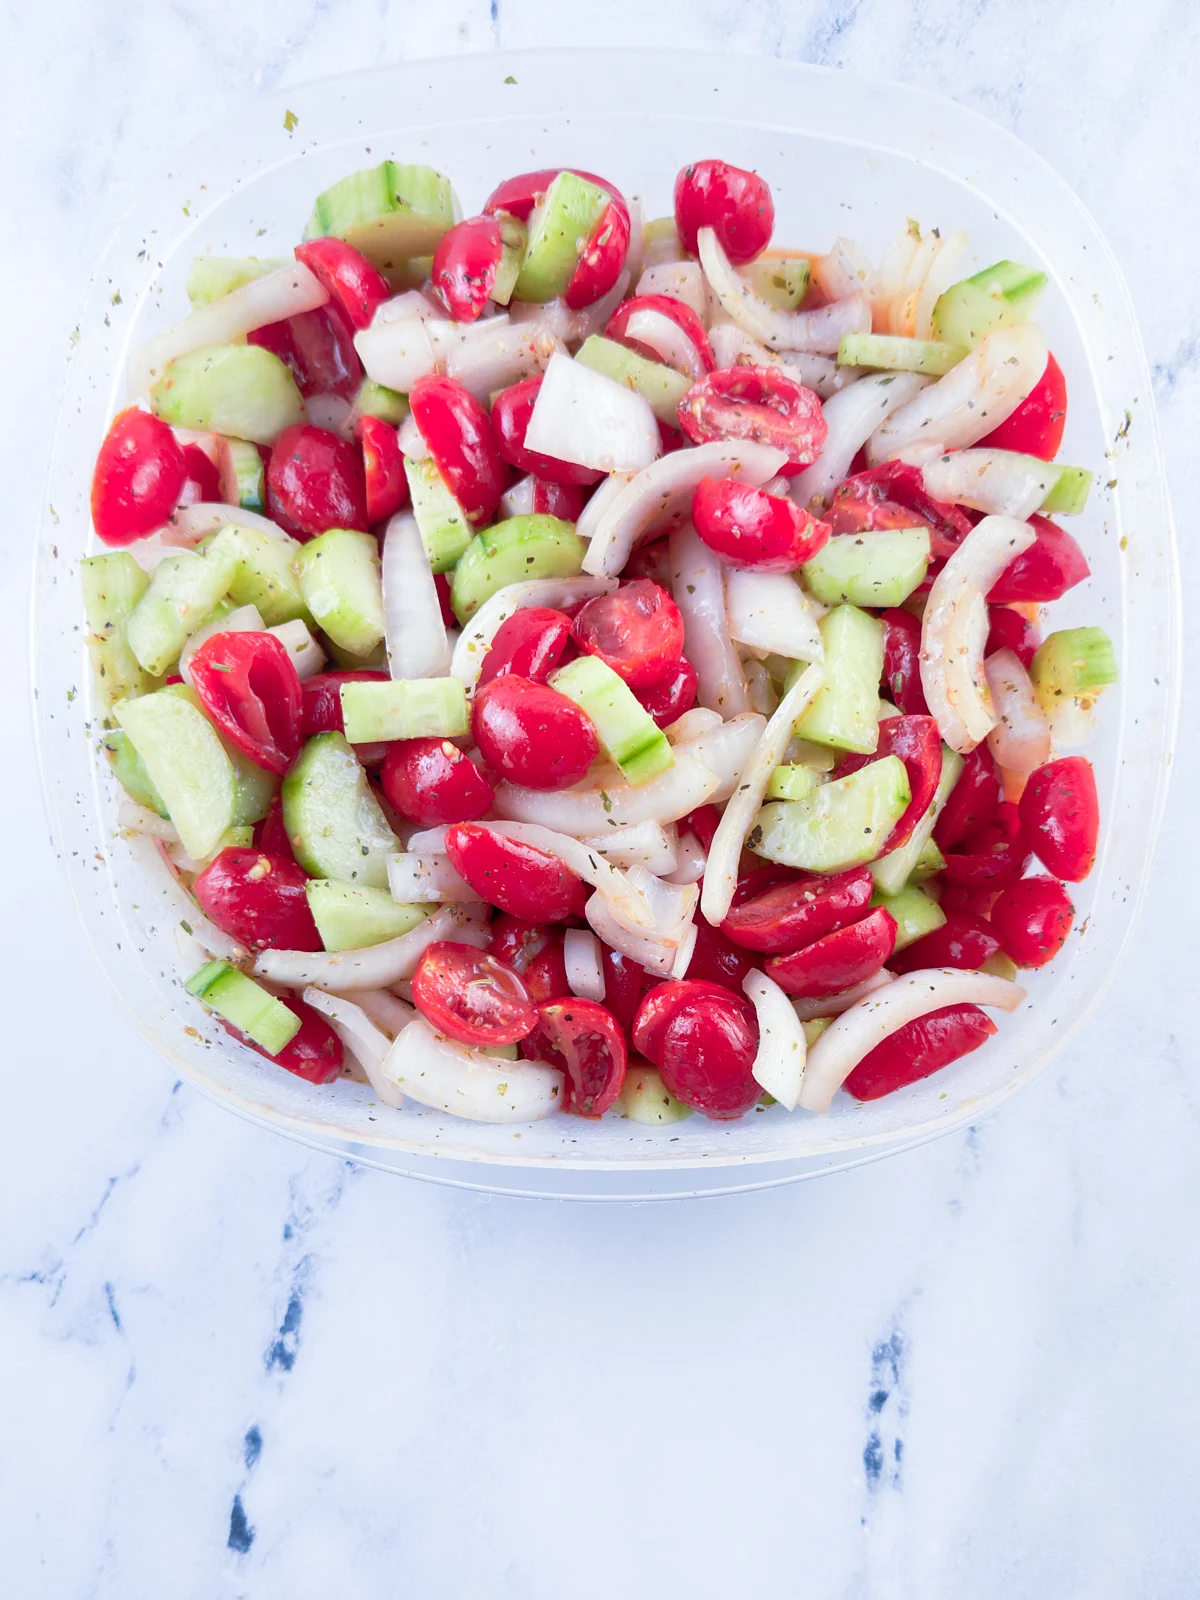 Marinated cucumber, tomato, and onion salad in a refrigerator safe container